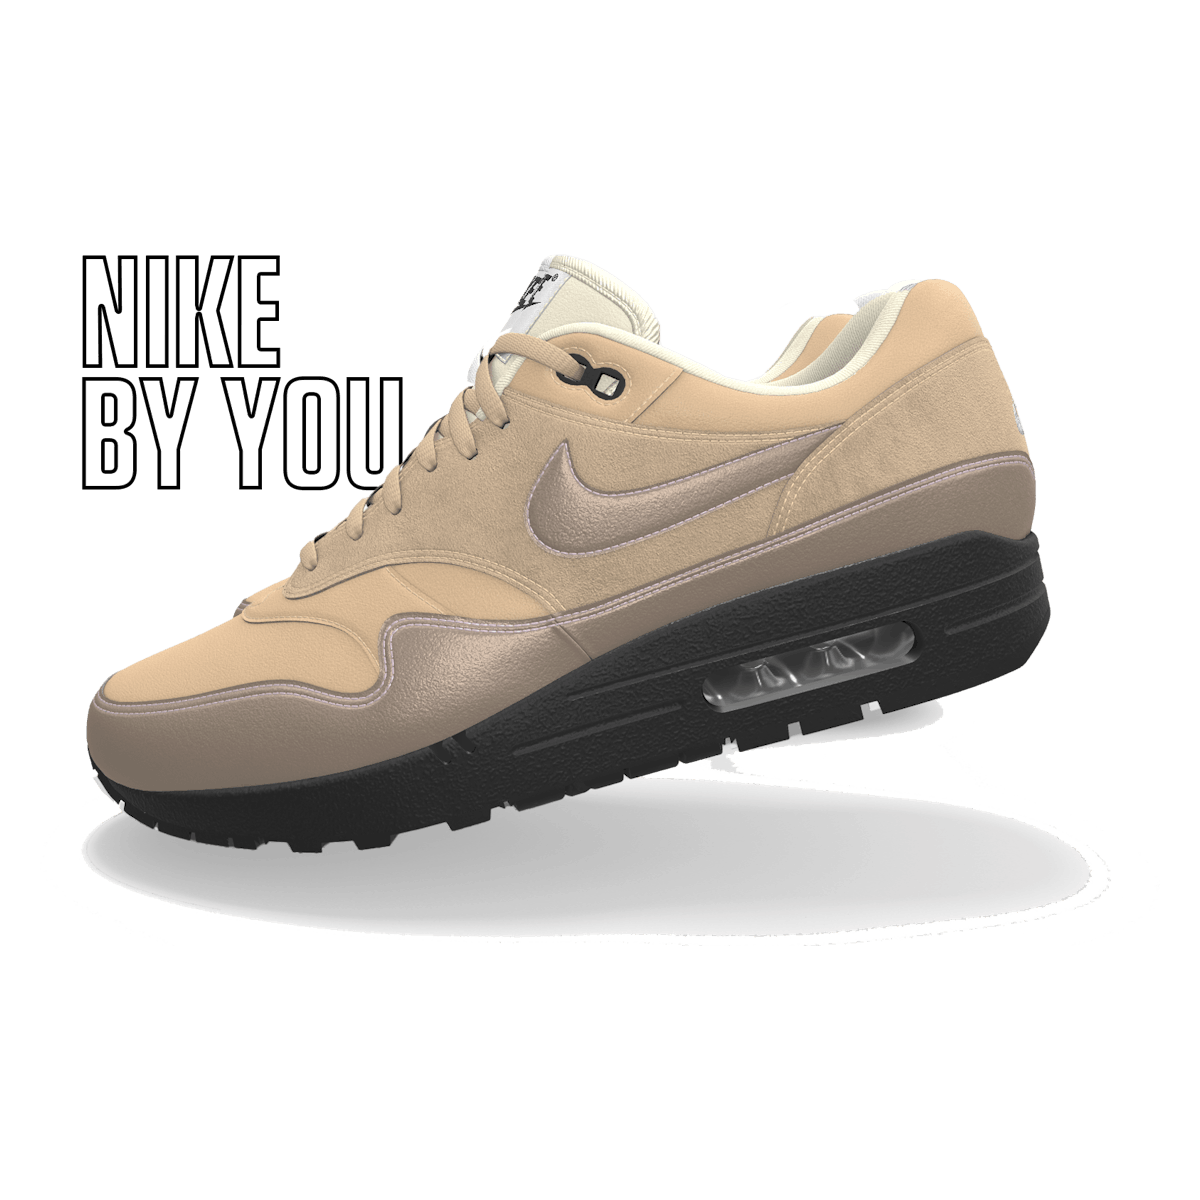 Nike Air Max 1 '87 "By You"